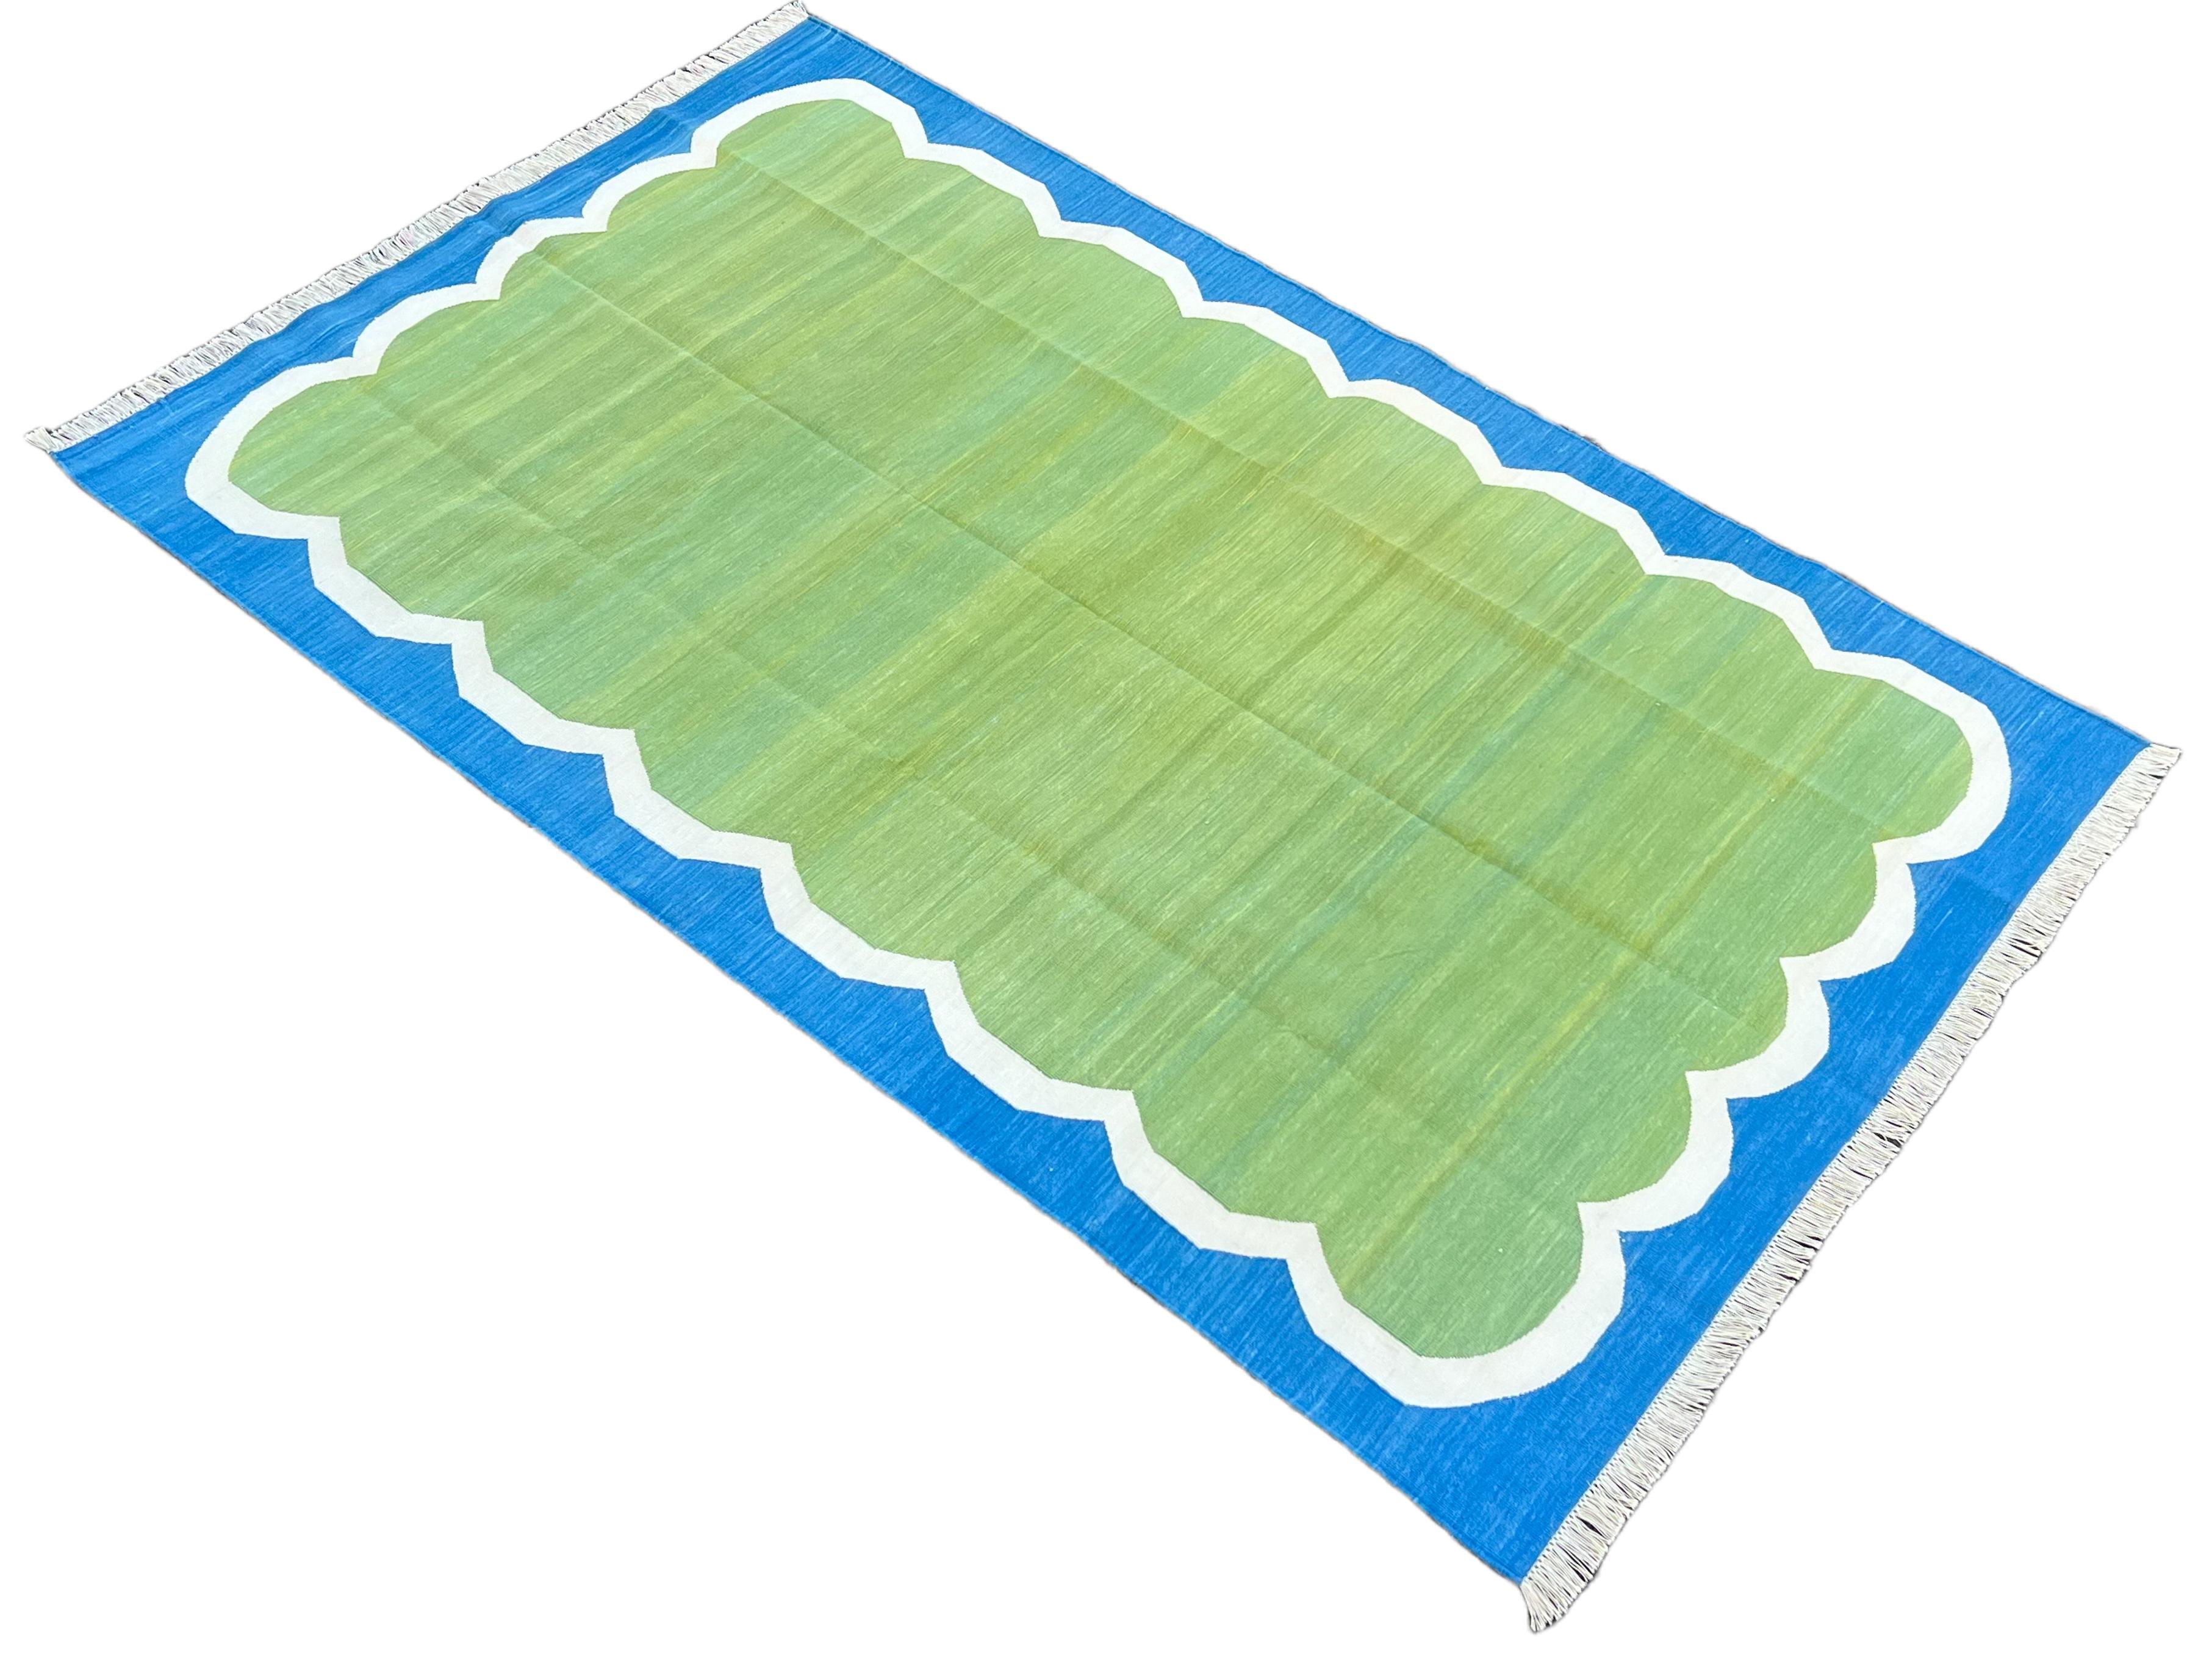 Cotton Vegetable Dyed Green, Cream And Blue Scalloped Striped Indian Dhurrie Rug-5'x8' 
These special flat-weave dhurries are hand-woven with 15 ply 100% cotton yarn. Due to the special manufacturing techniques used to create our rugs, the size and